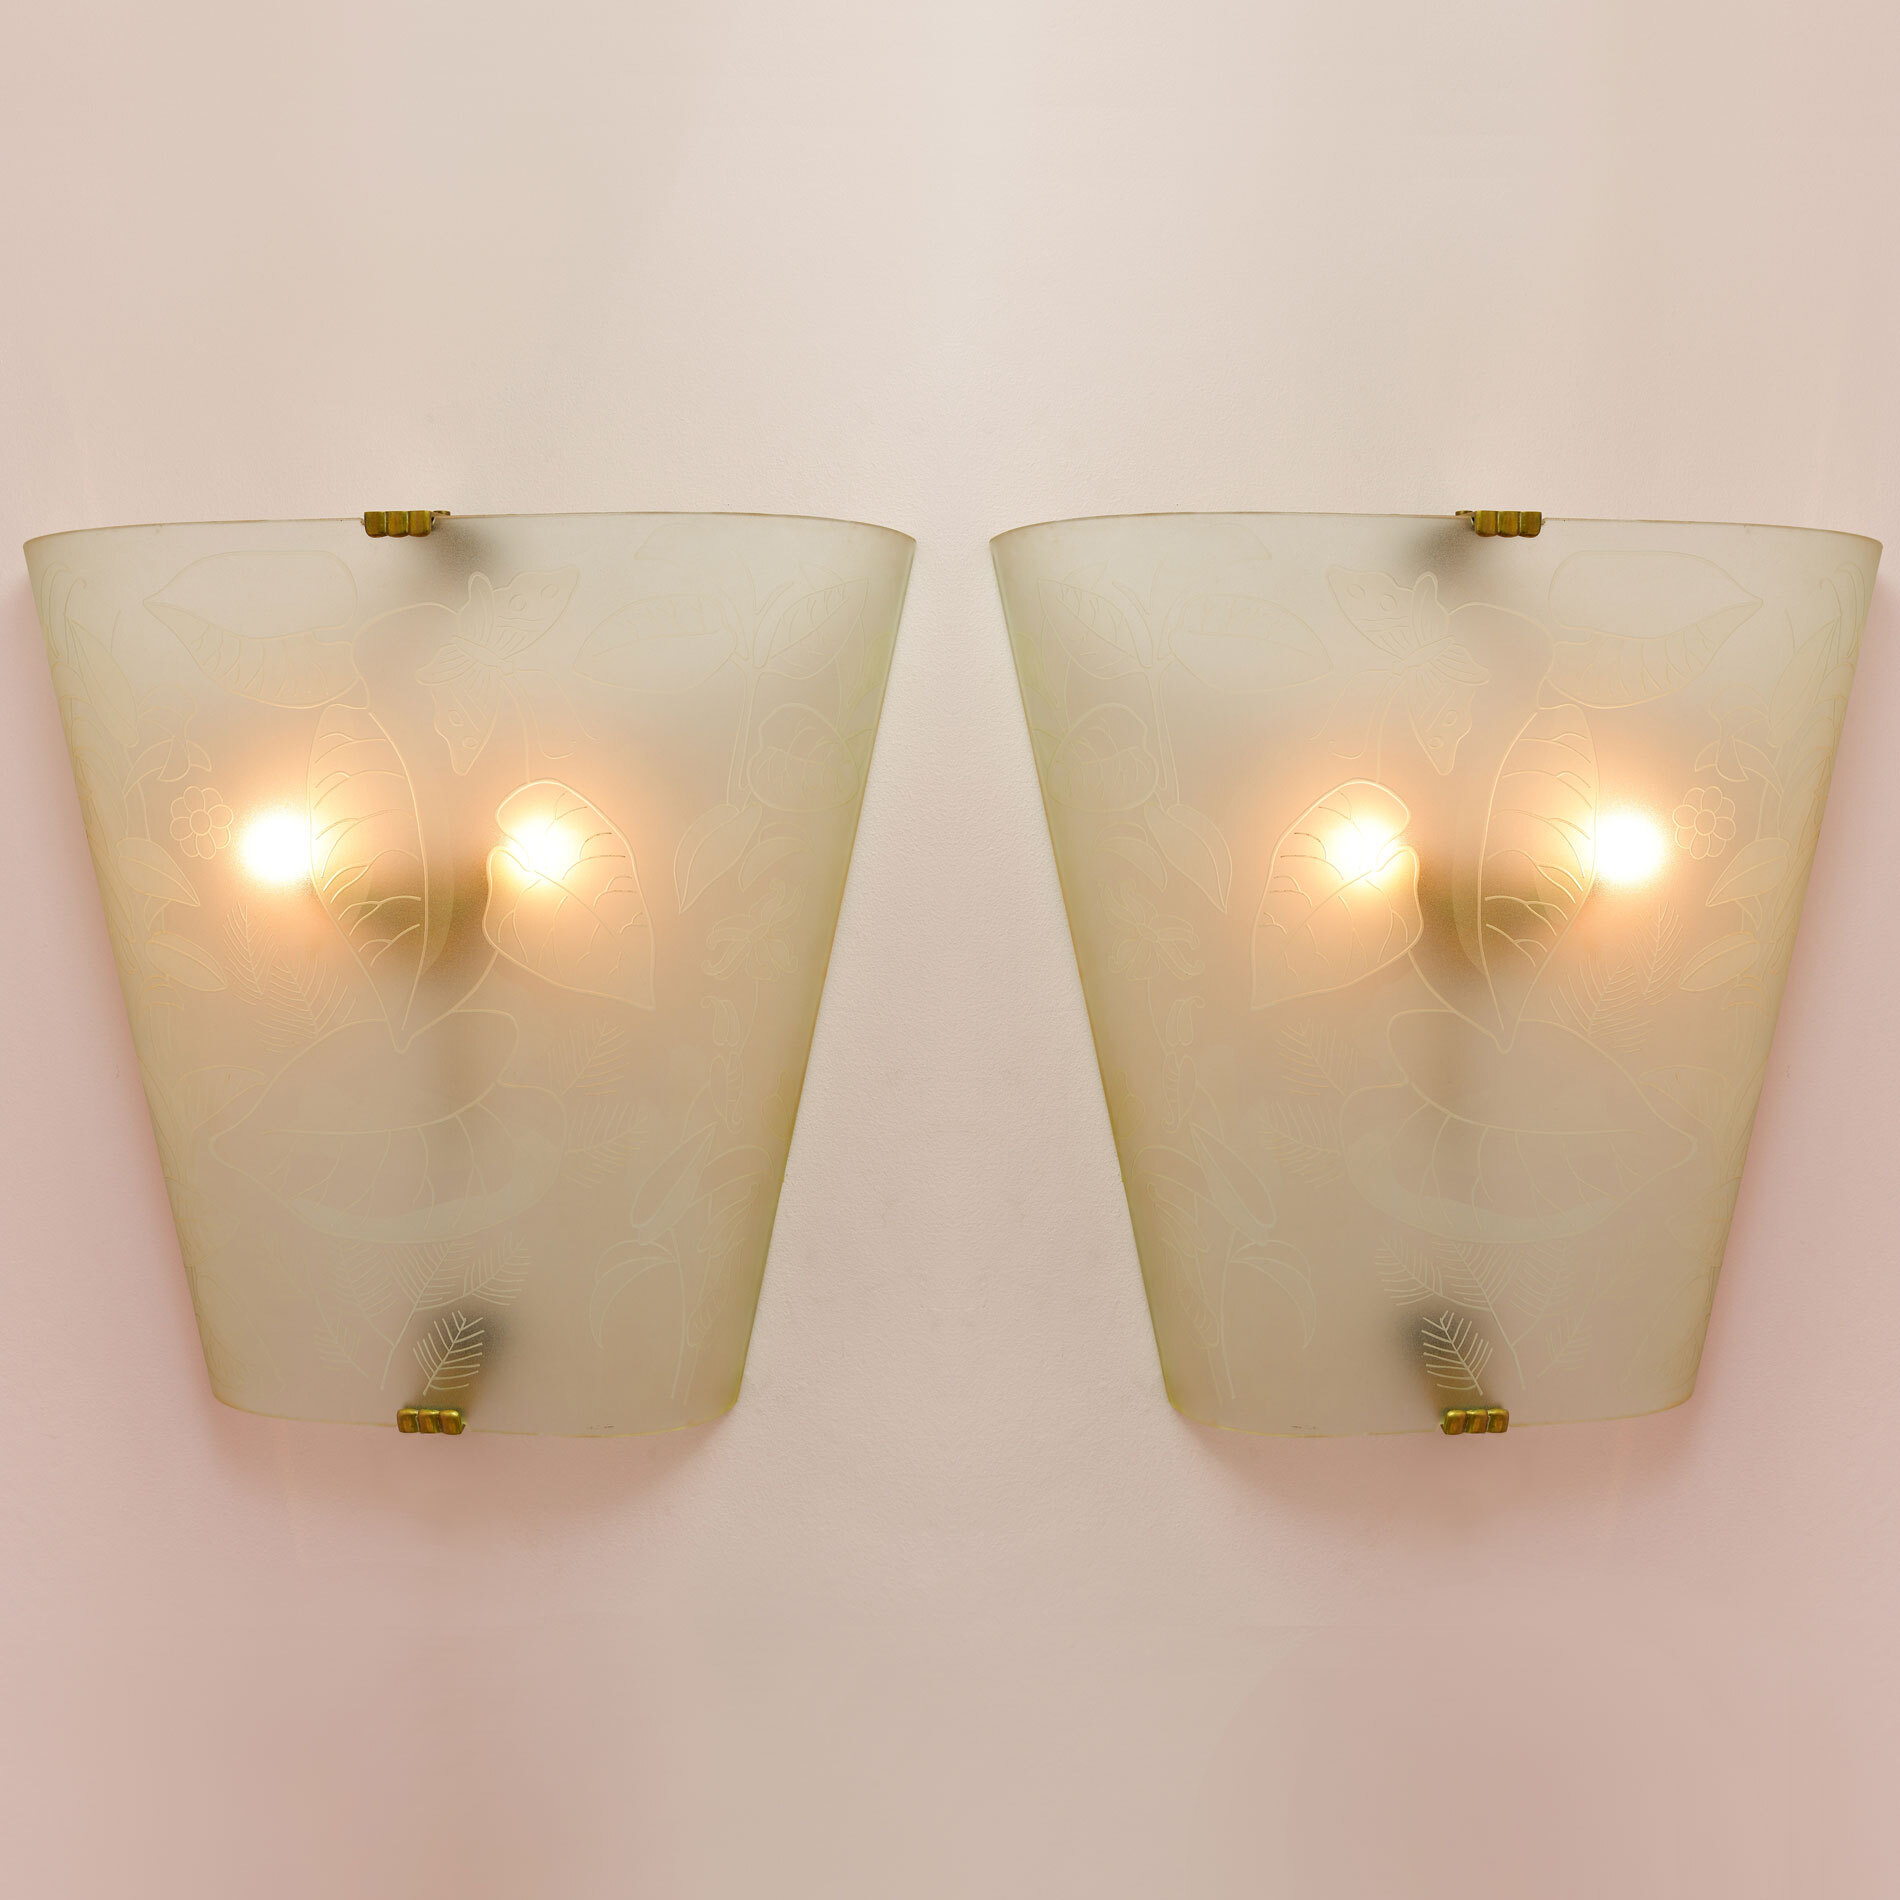 The image for Pair Of Etched Glass Wall Lights 01